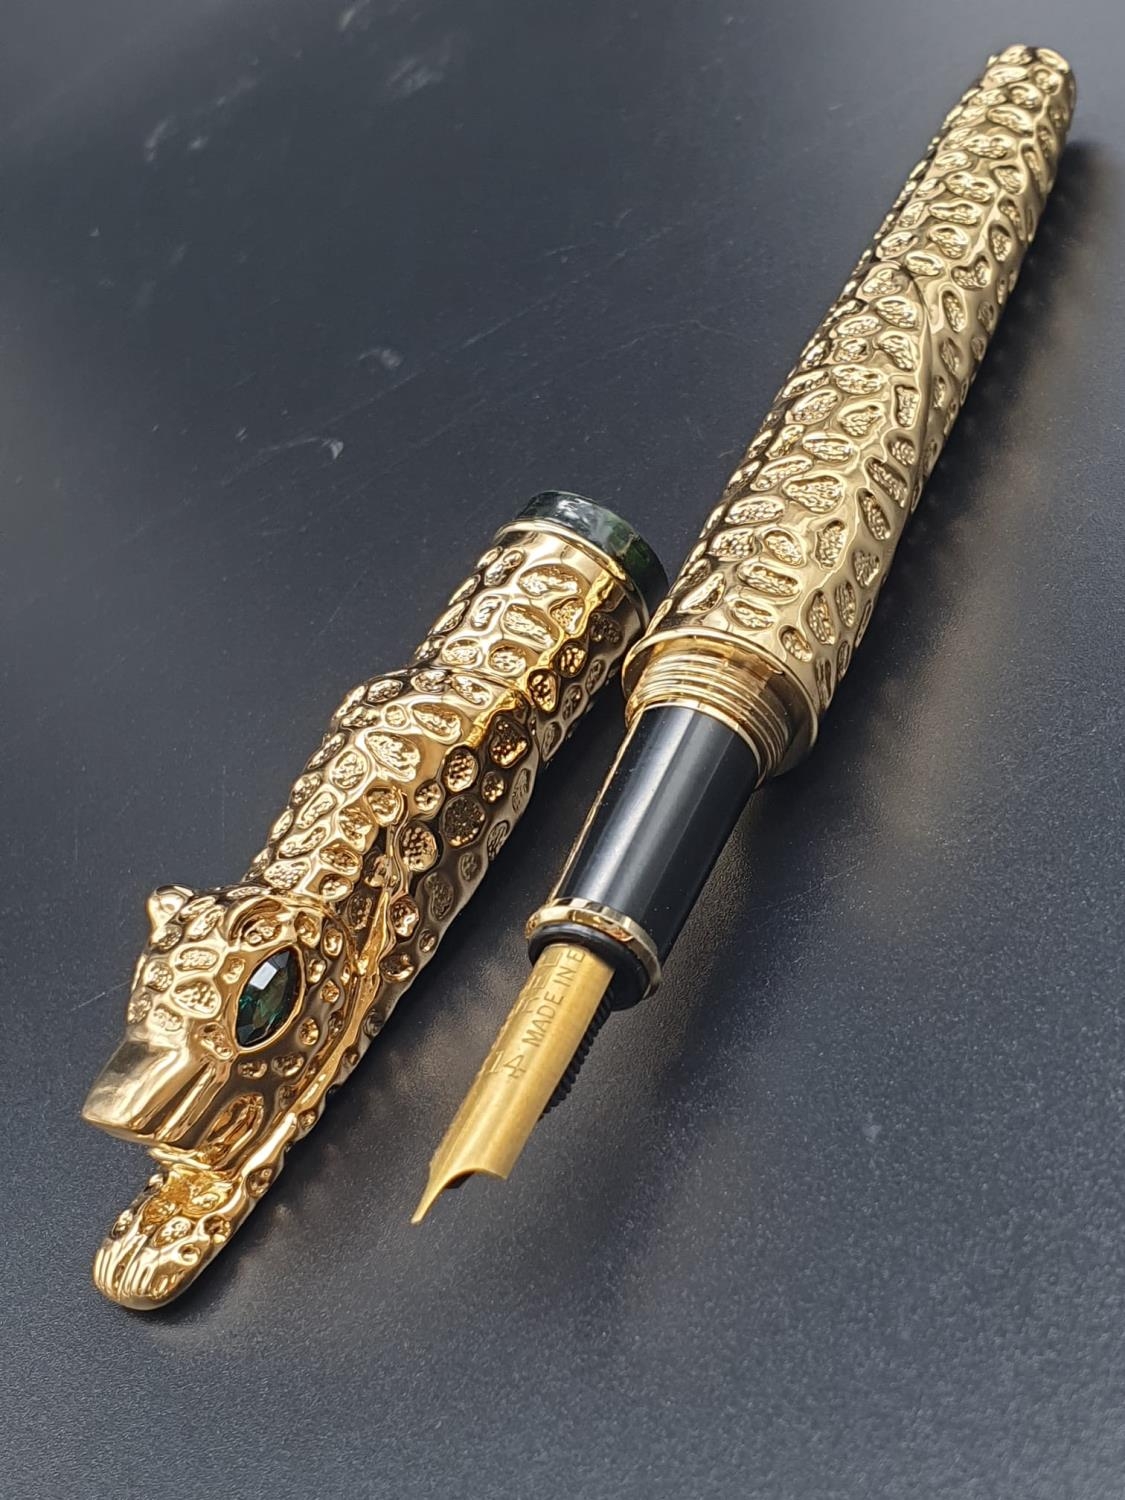 A rare and beautiful, Cartier style, gold filled, fountain pen in a velvet pouch.